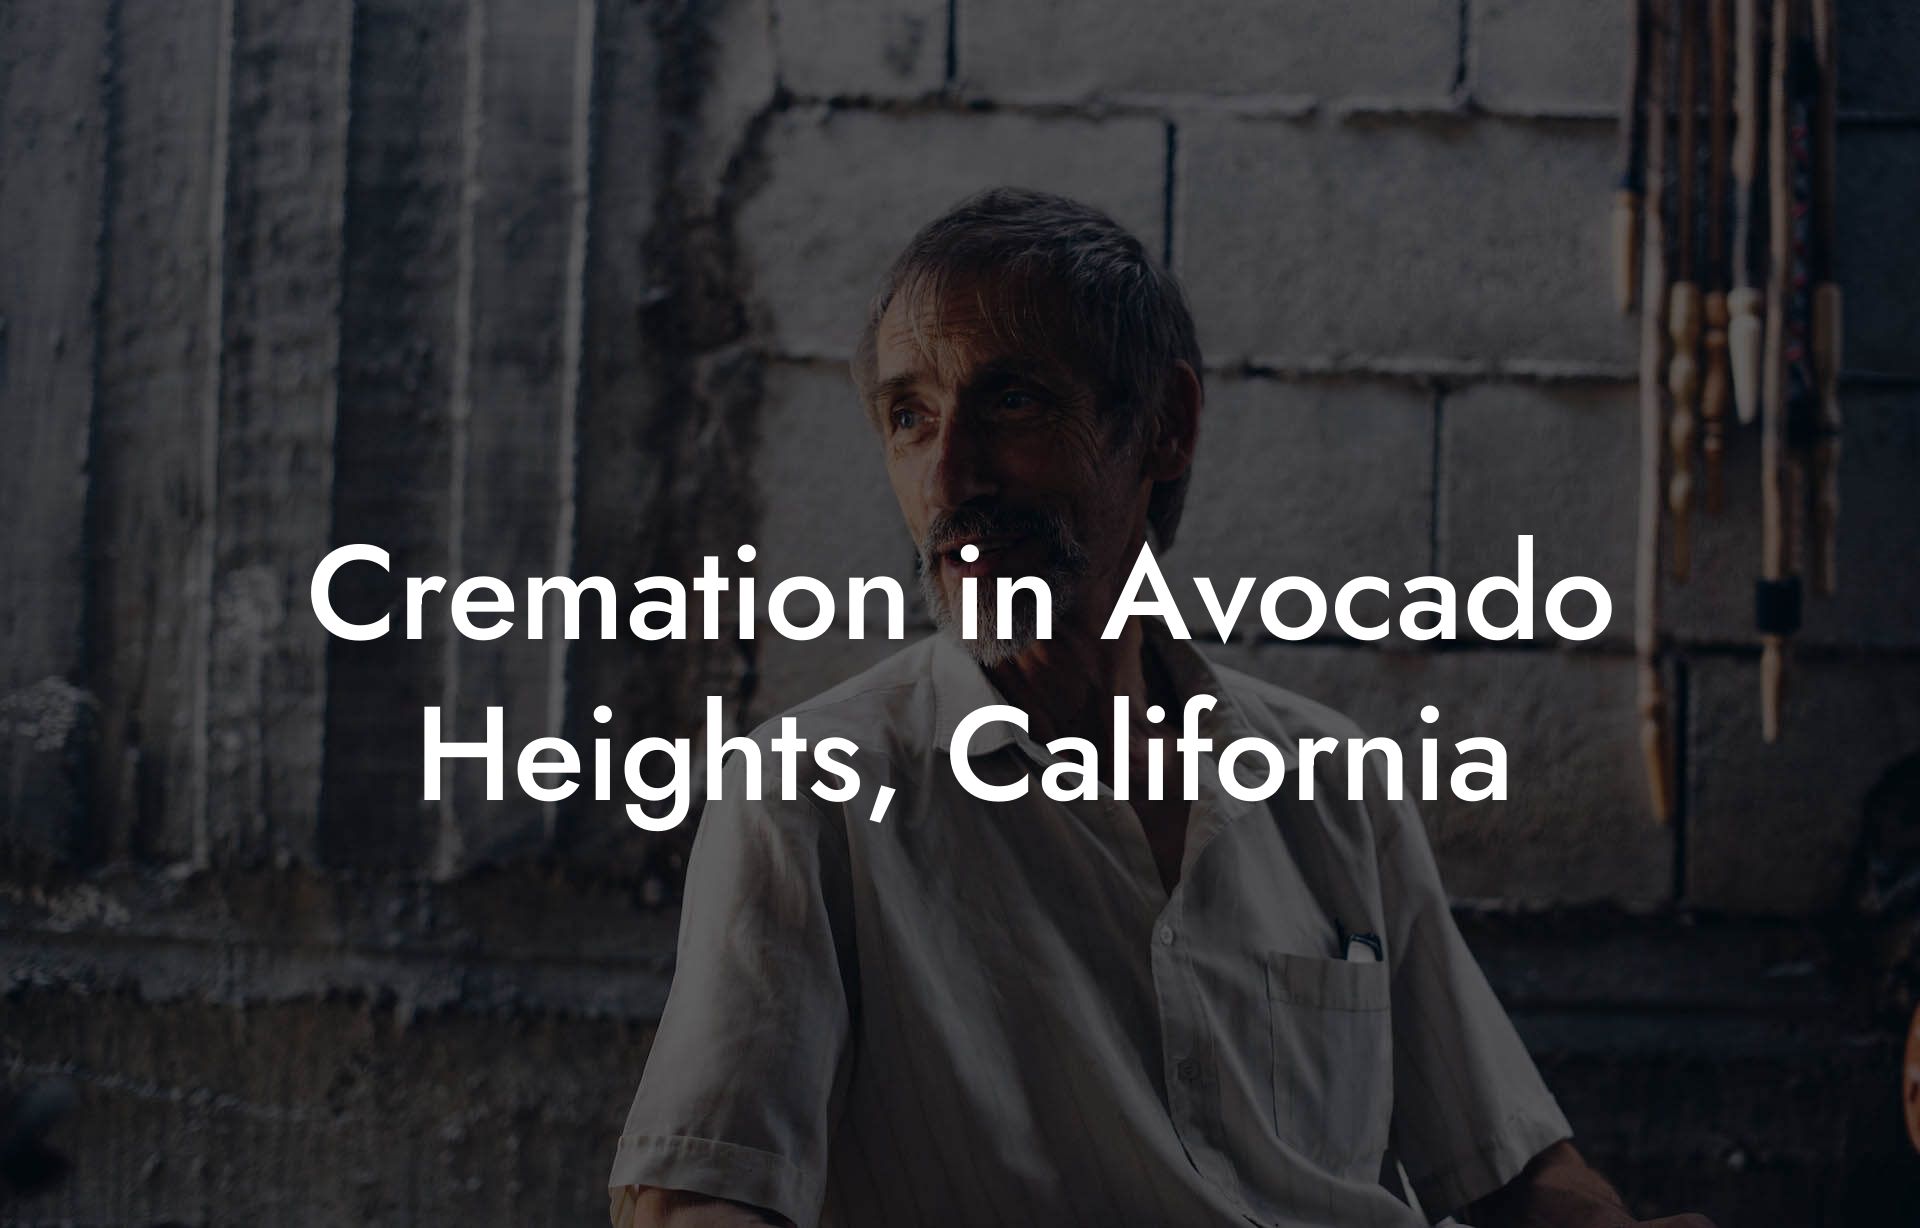 Cremation in Avocado Heights, California